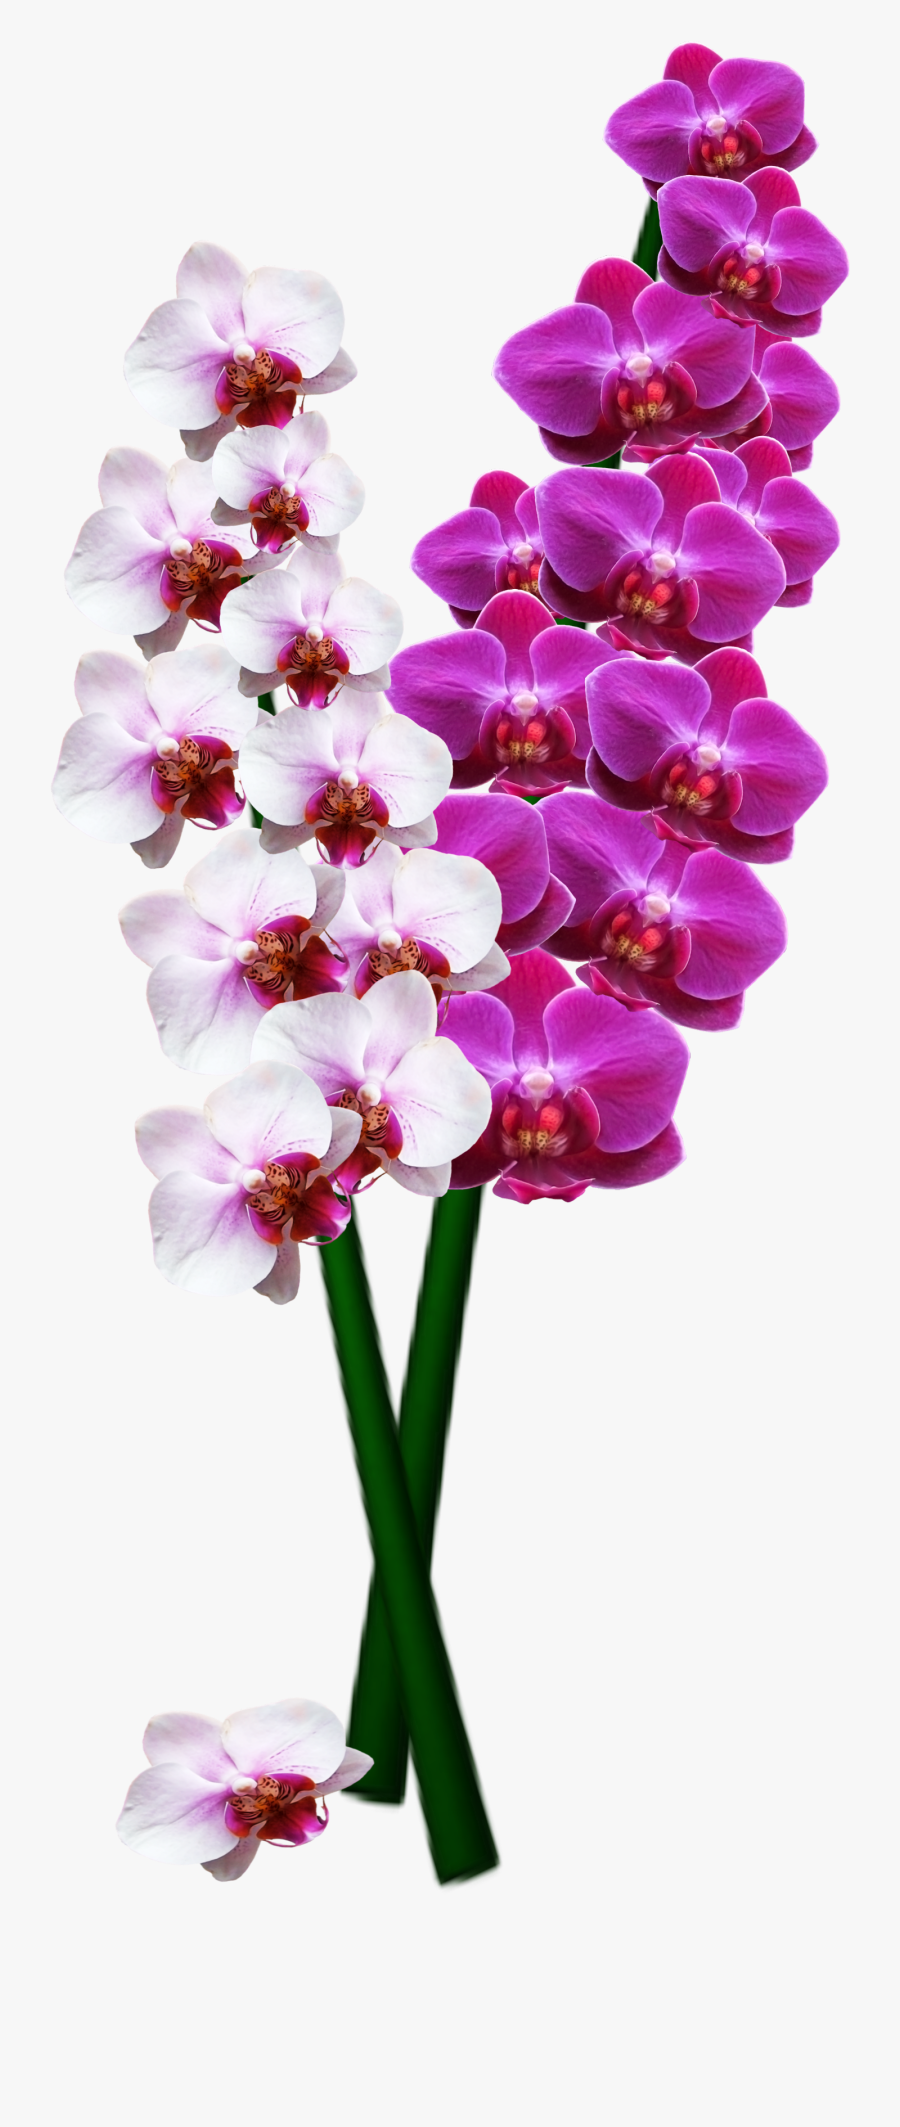 Orchid Png Image - Orchid Flower Long Png, Transparent Clipart